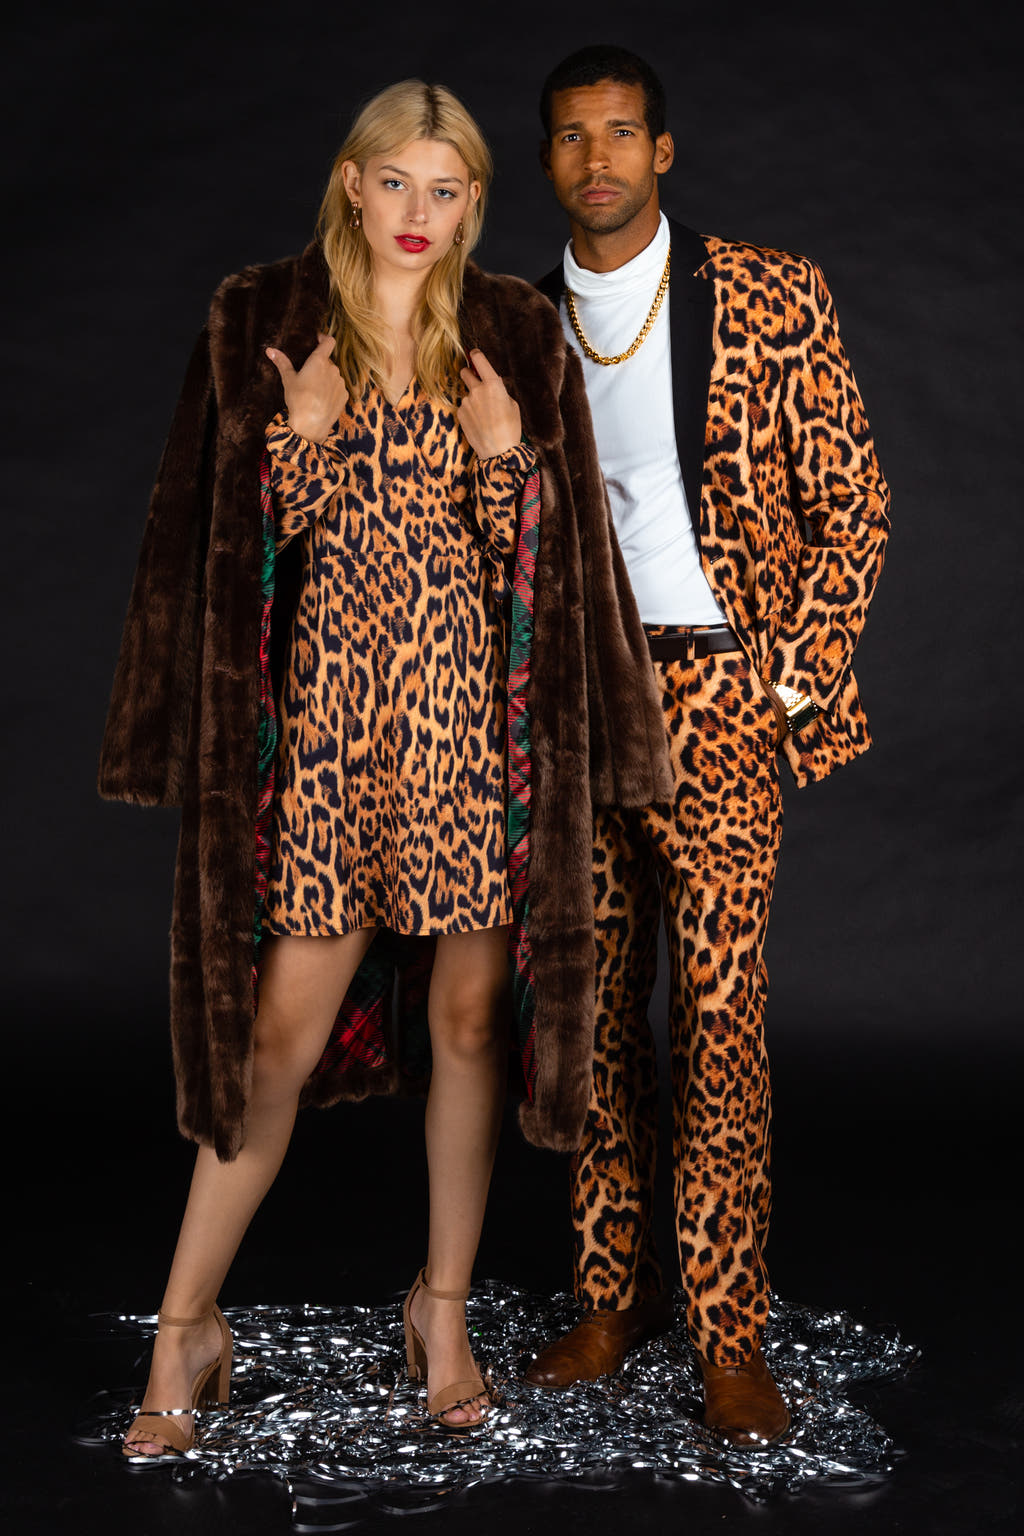 The fastest finishers leopard print suit and dress